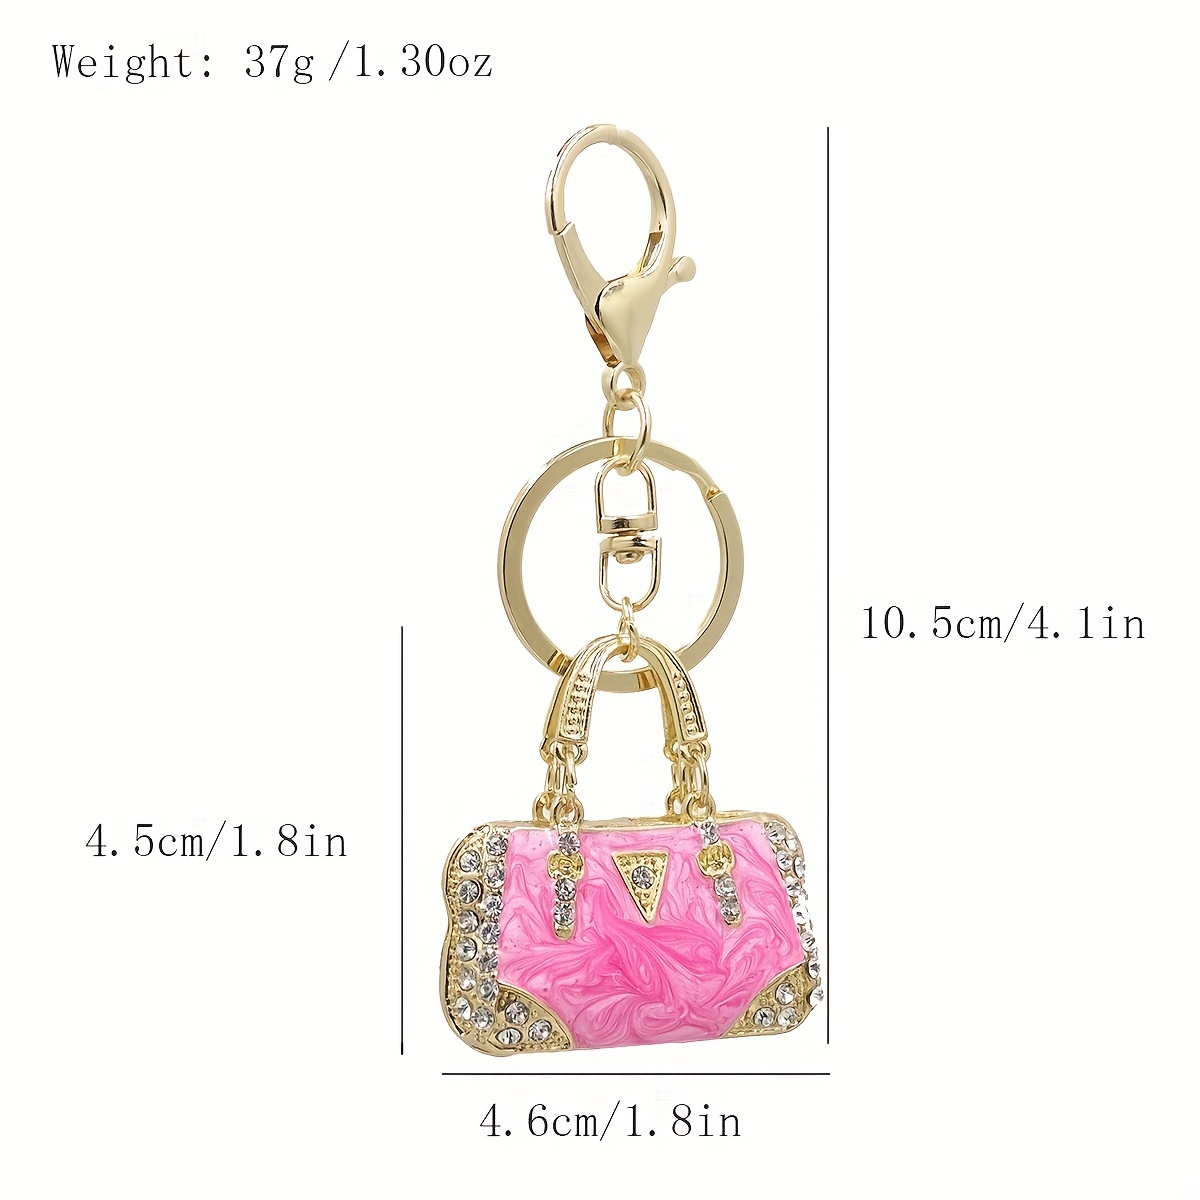 Louis Vuitton Style Enameled and Rhinestone Flower Charms Keychain